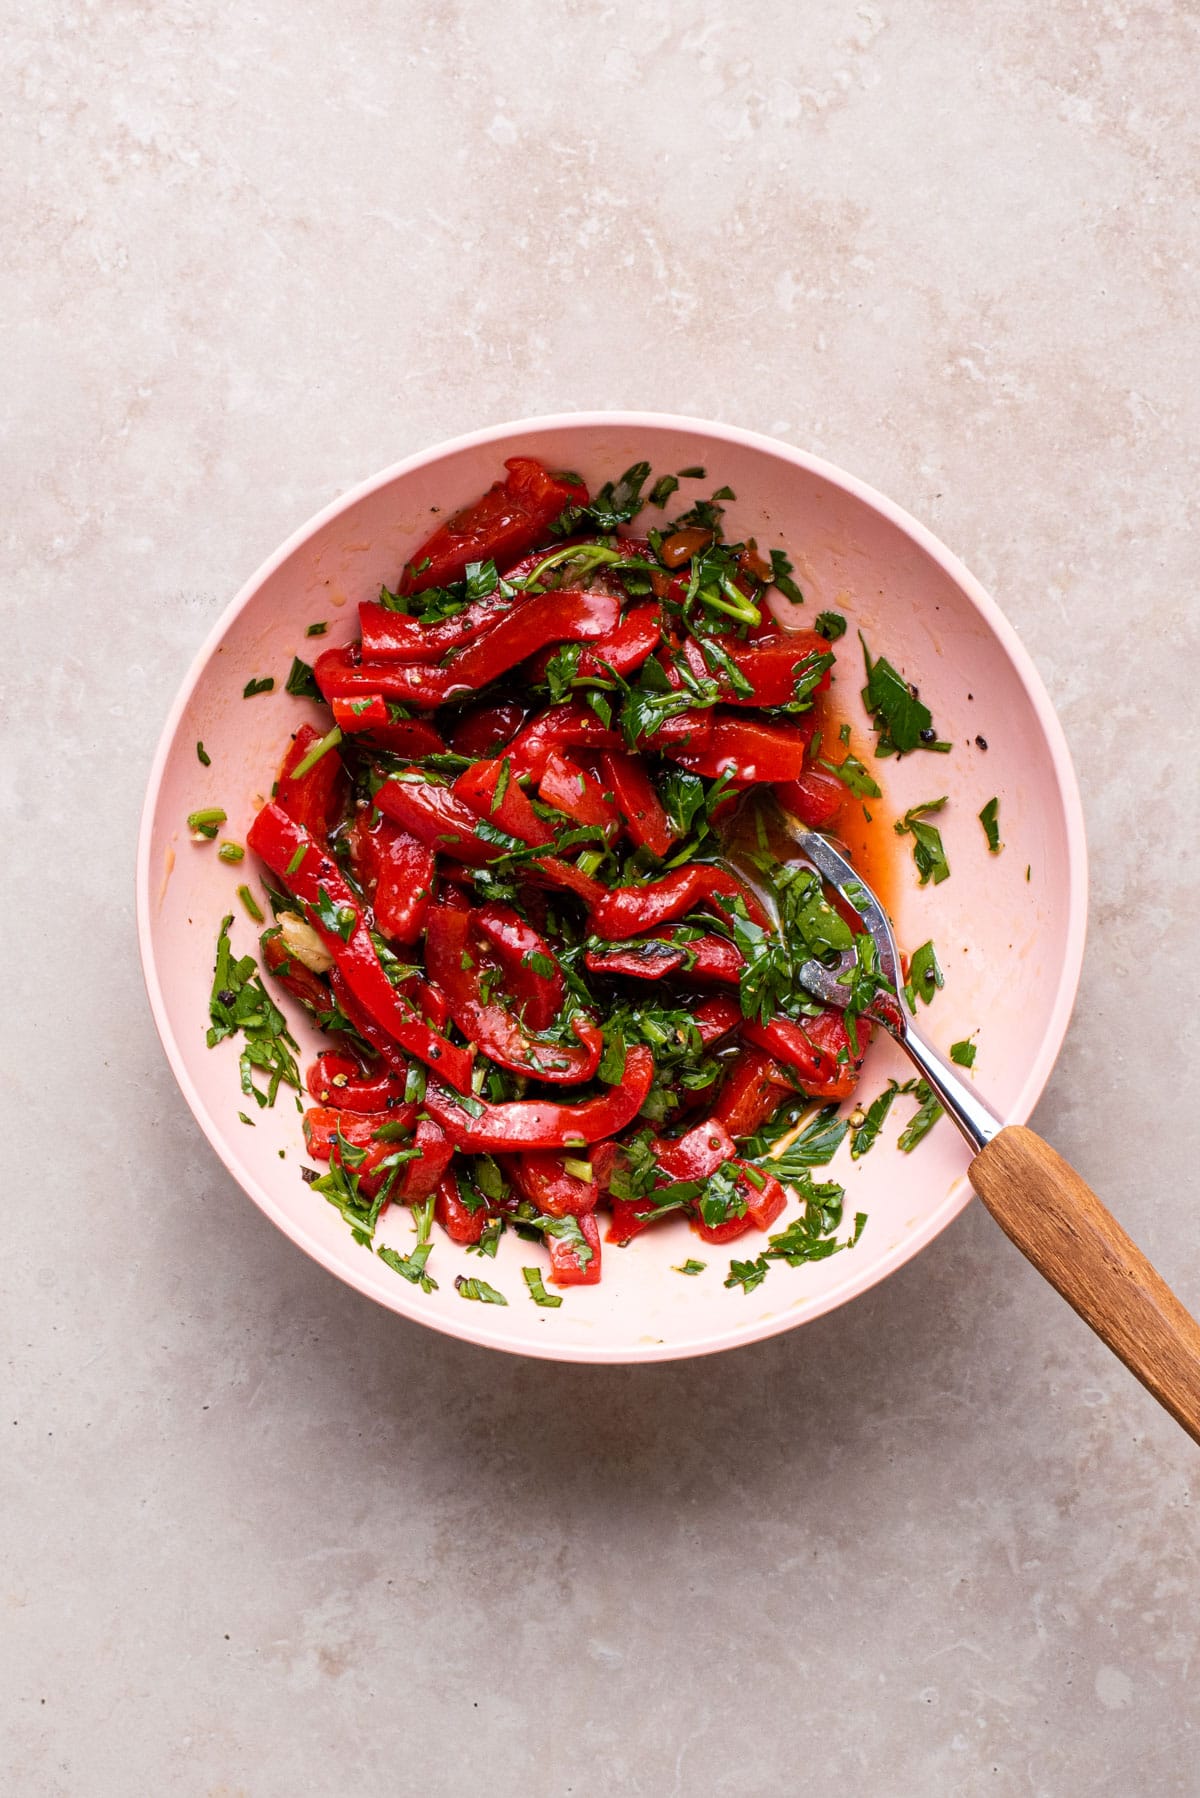 Roasted red pepper and parsley relish in a pink bowl.